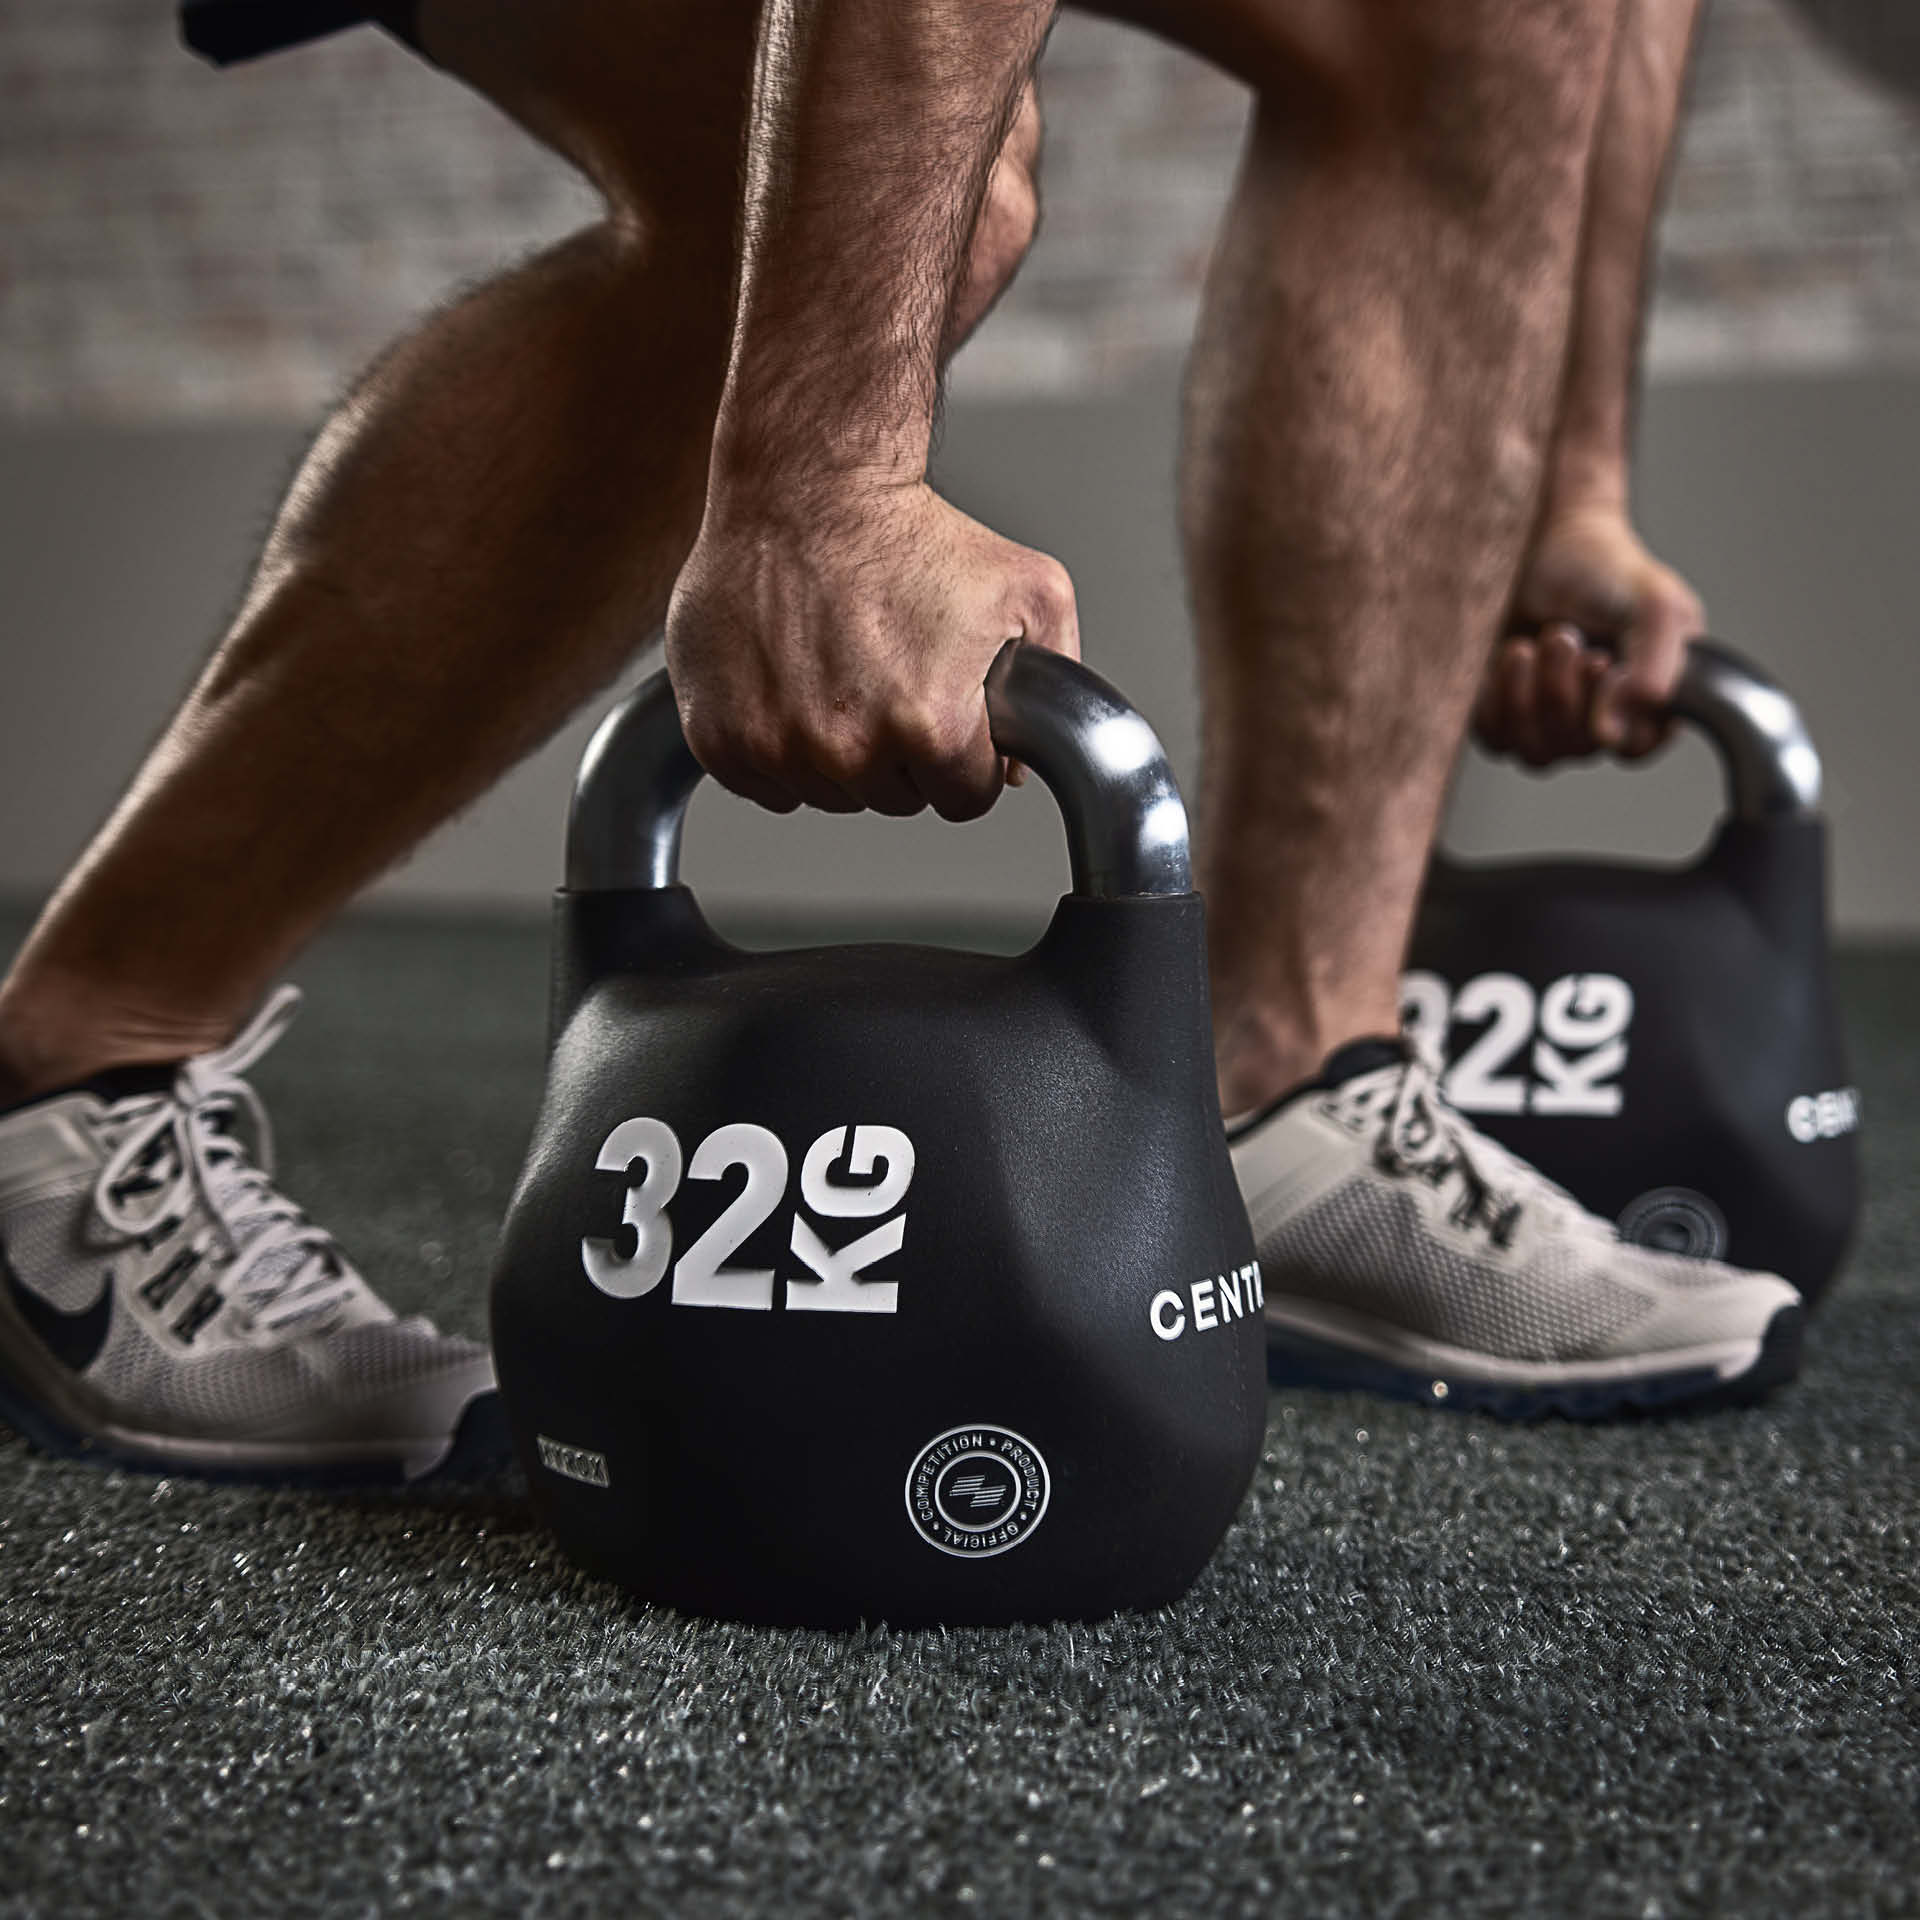 CENTR x HYROX Competition Octo Kettlebell 32 kg